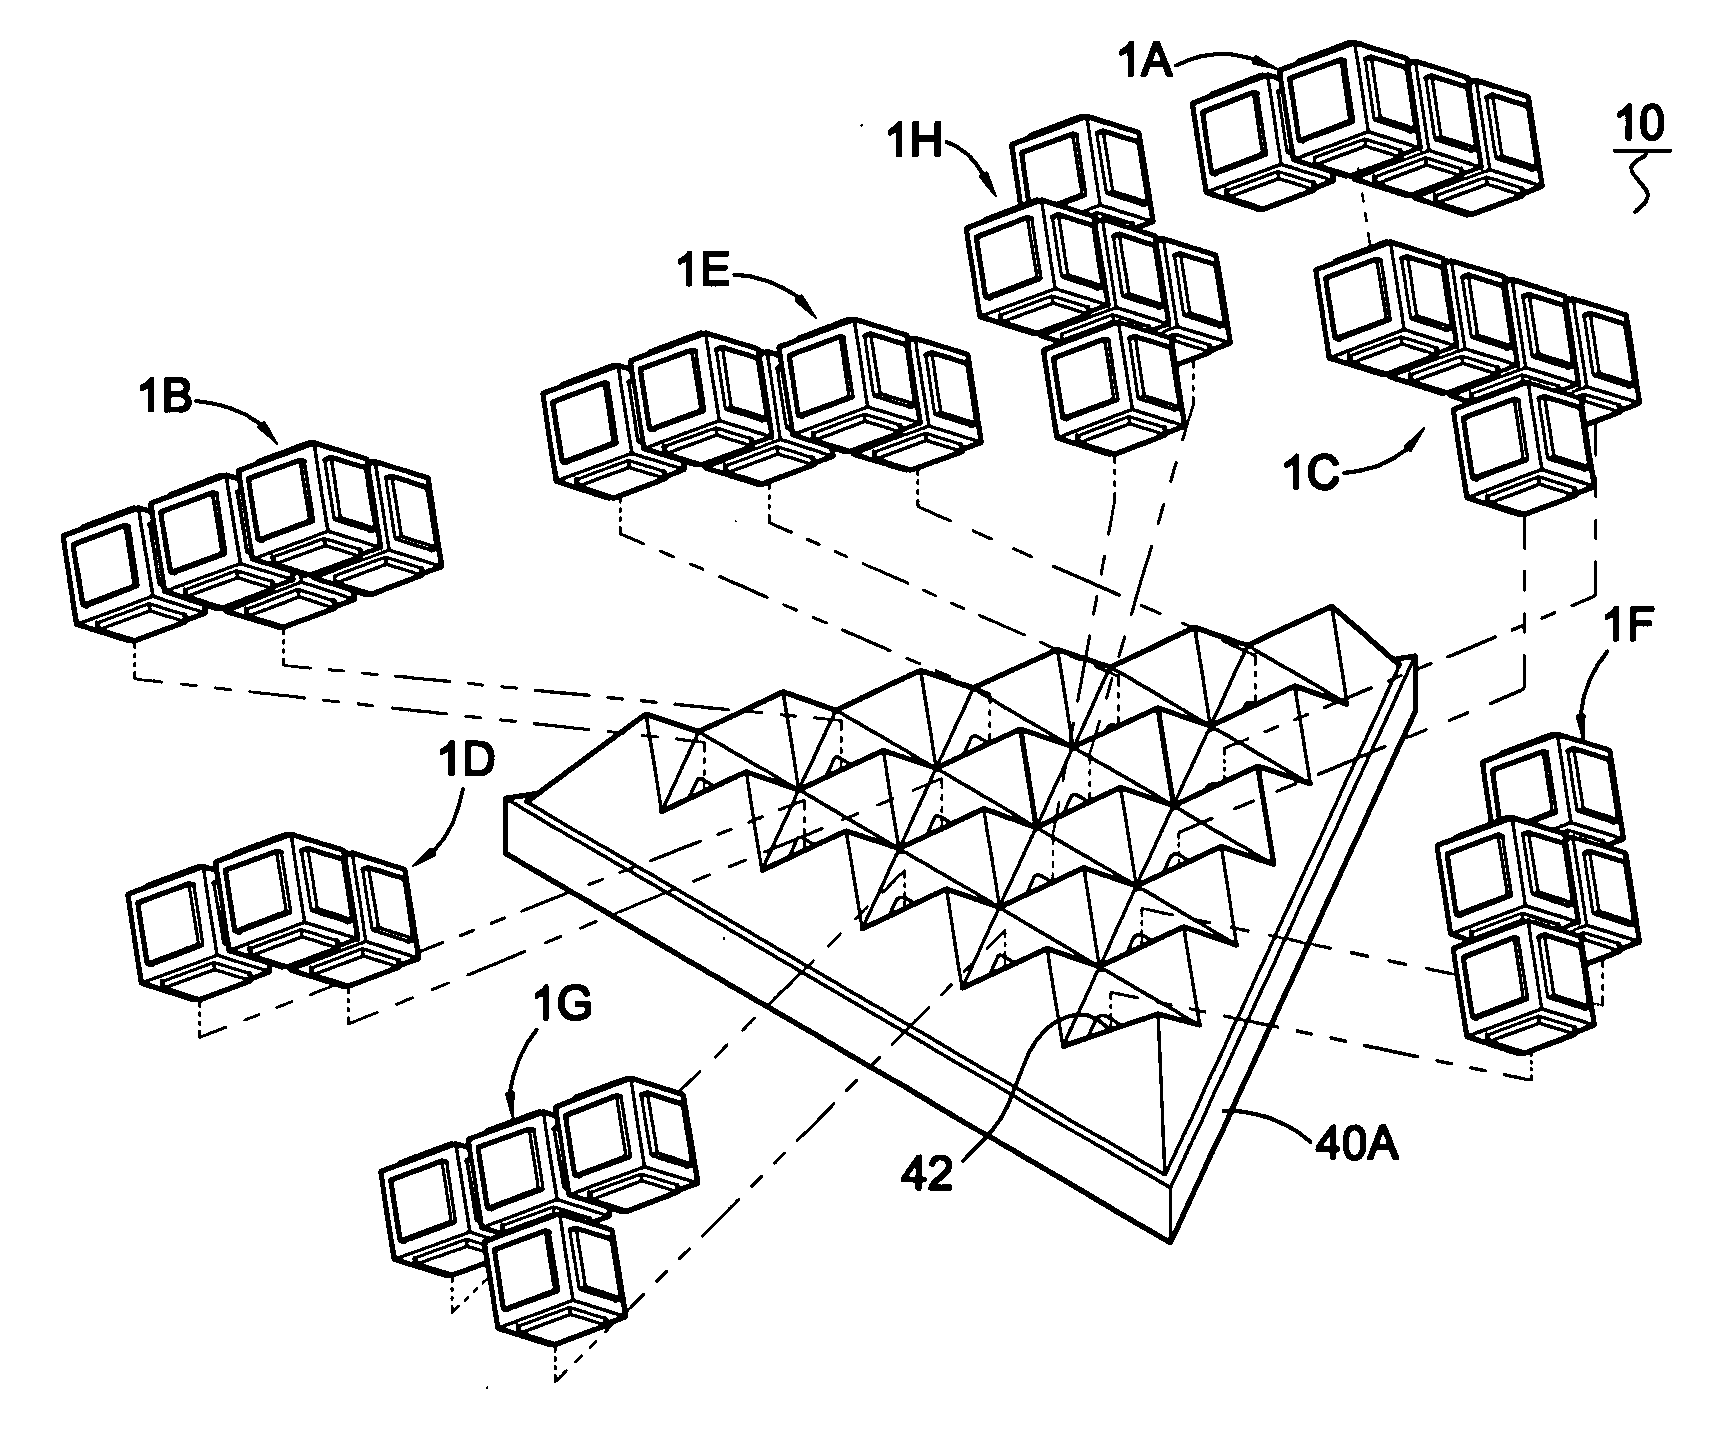 Building base plates assembled to build block sets in two or three dimensional configurations